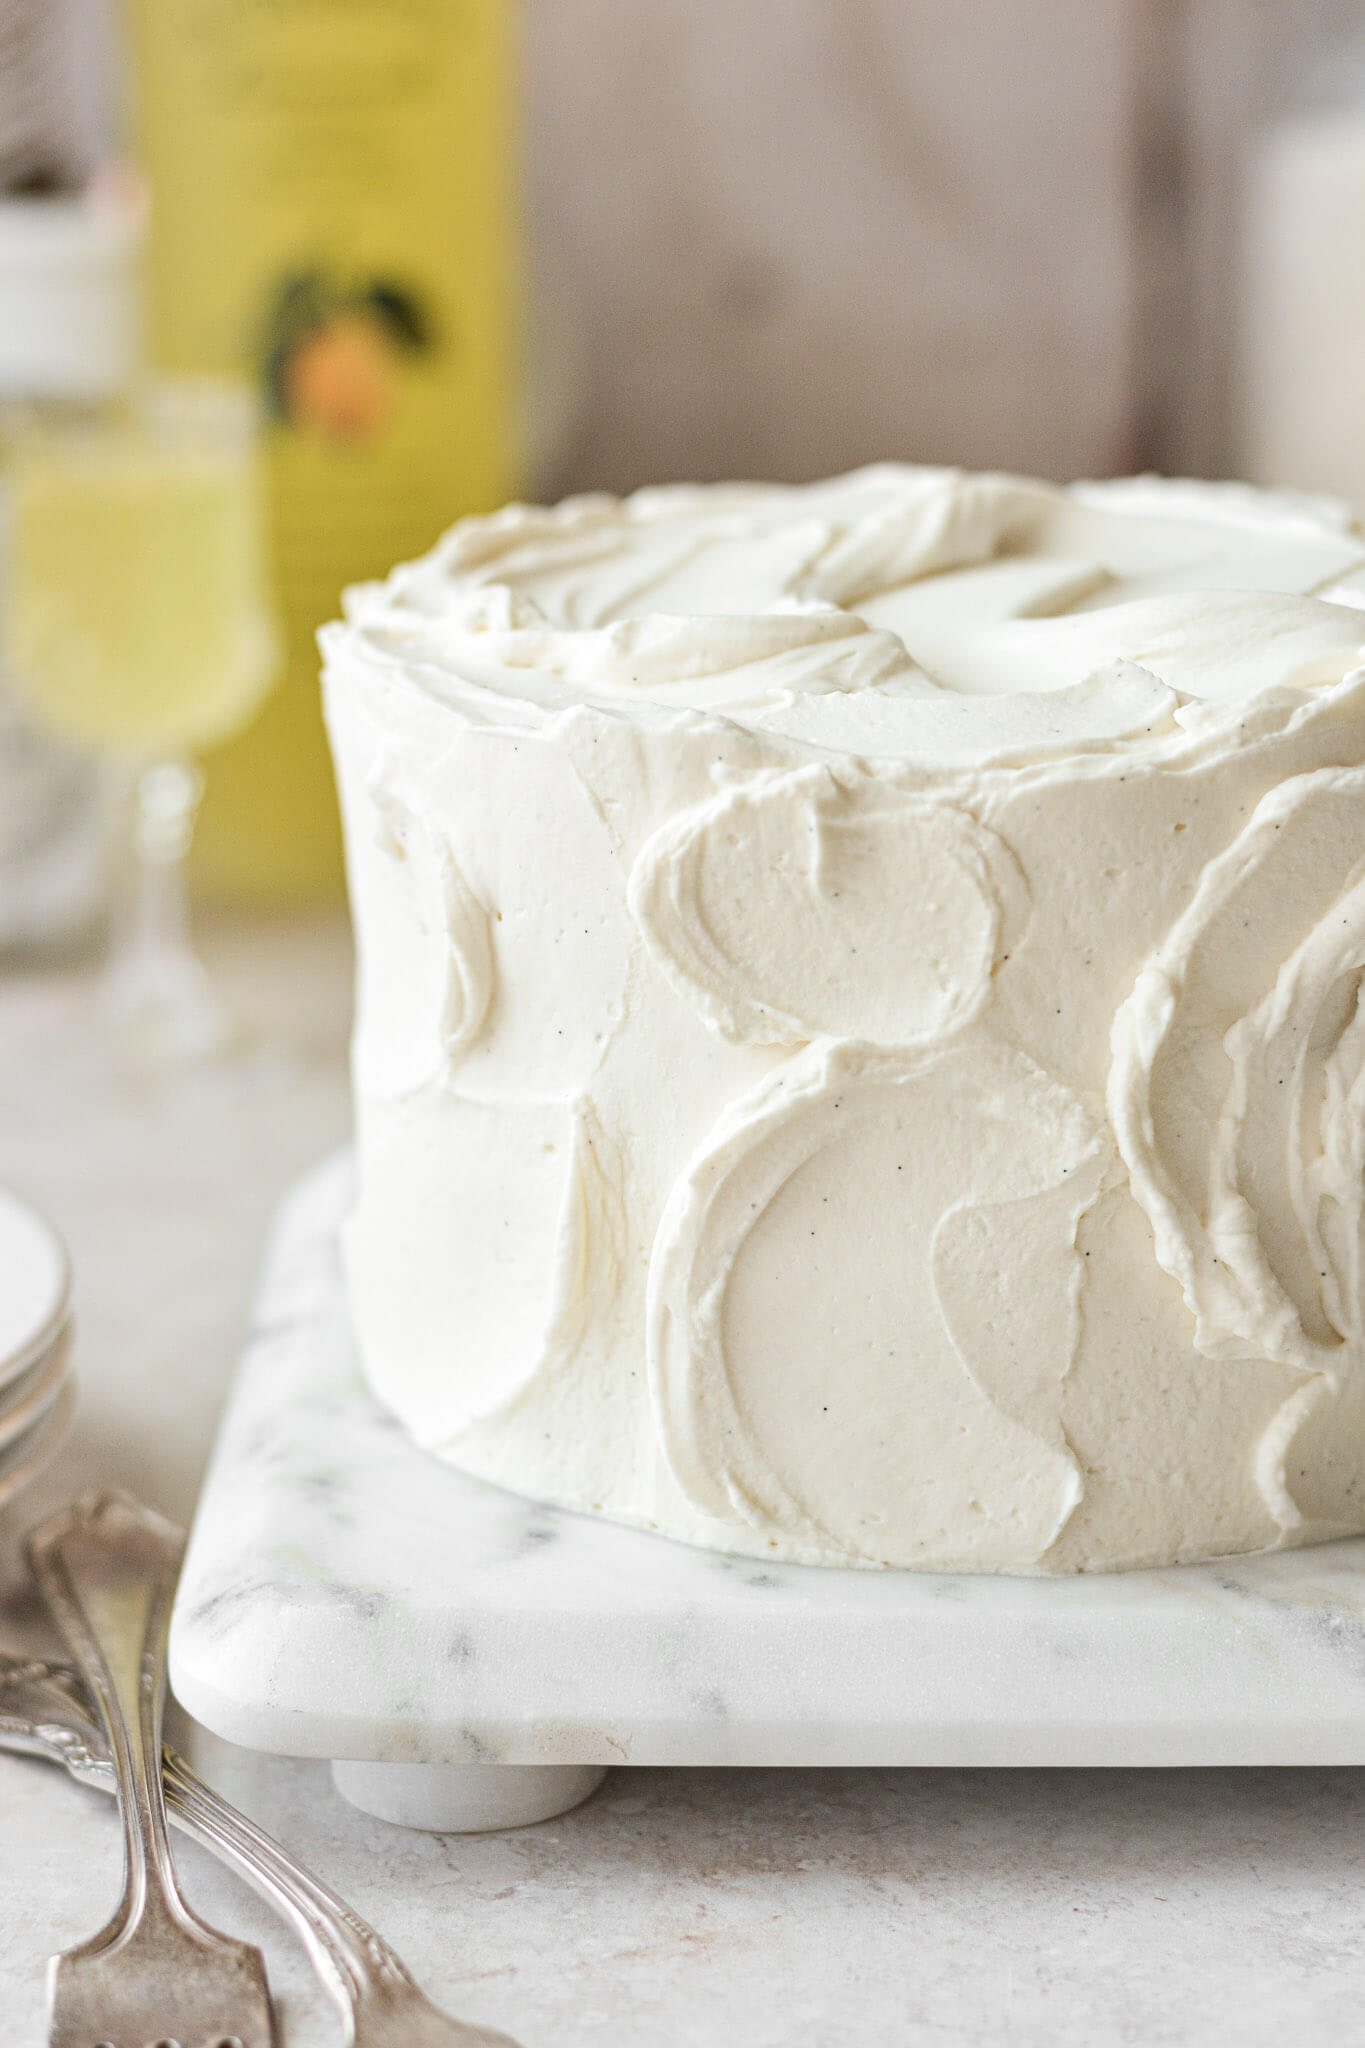 Limoncello cake with whipped cream frosting.